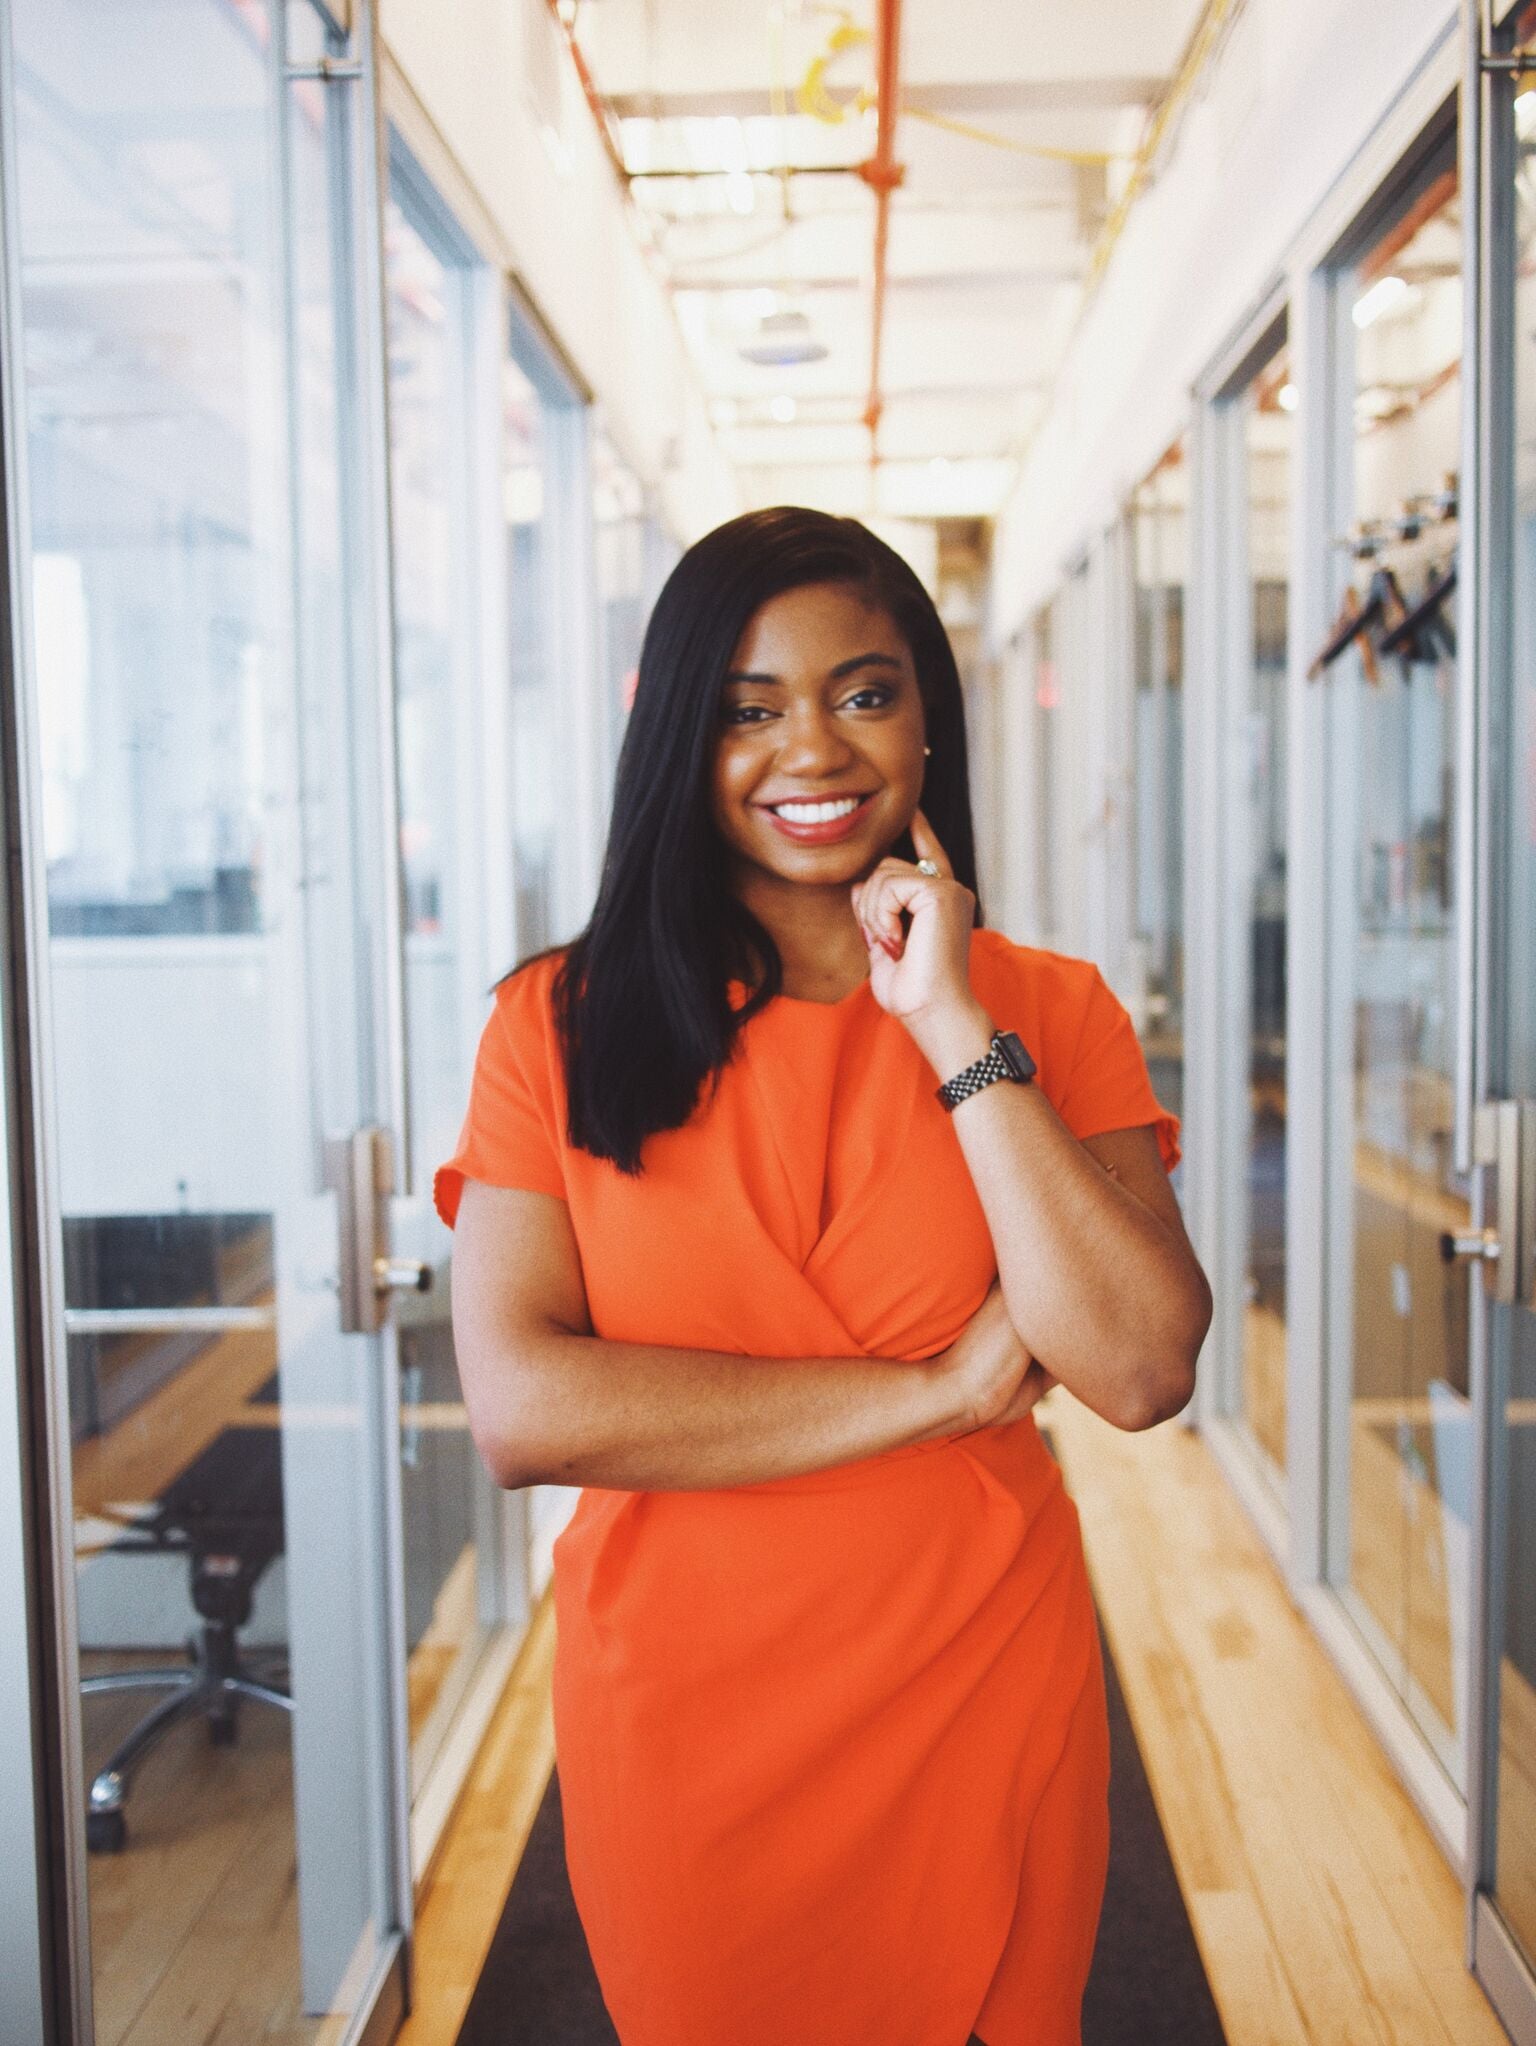 ESSENCE 50: 'Her Agenda' Founder Rhonesha Byng On Why The Key To Success For Black Women Is Each Other
